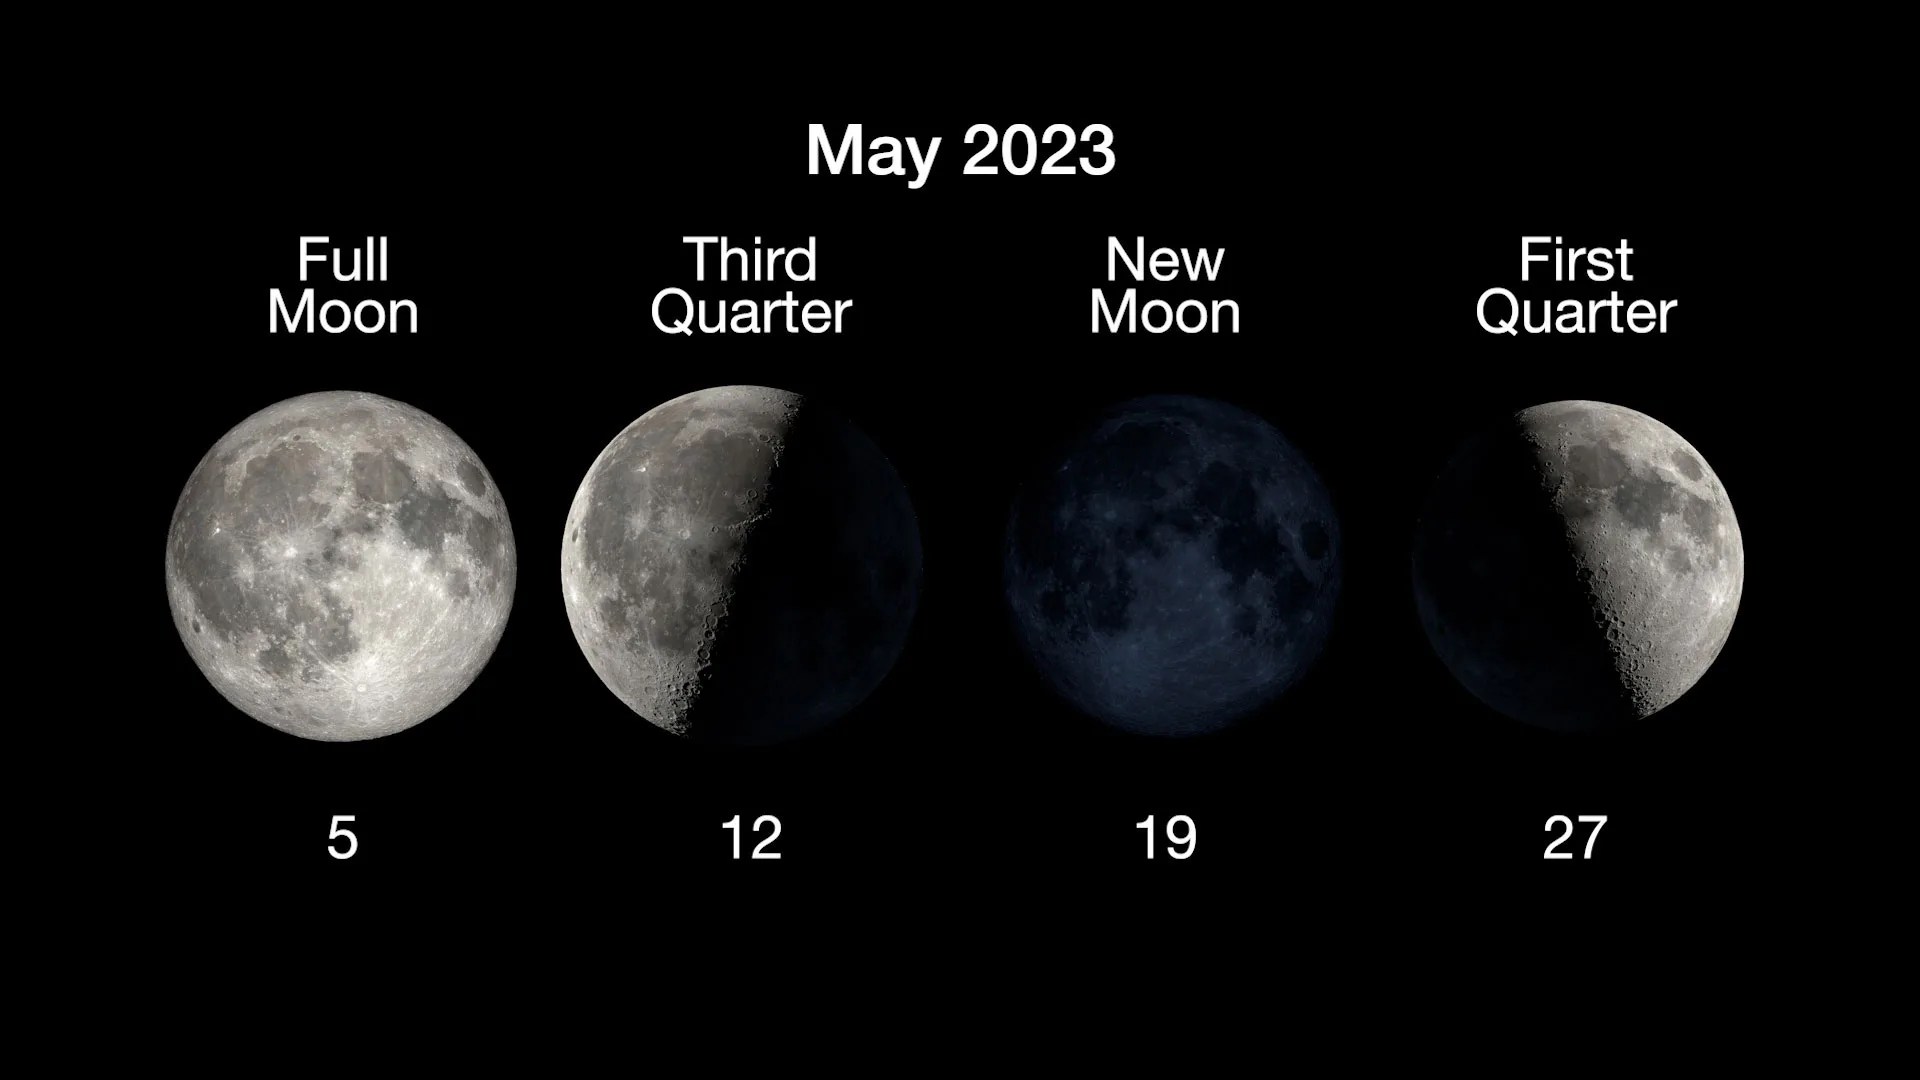 This graphic shows the phases on the Moon for May 2023. The full moon is on May 5; the 3rd quarter on May 13; a New Moon on May 19 and the first quarter moon on May 27.